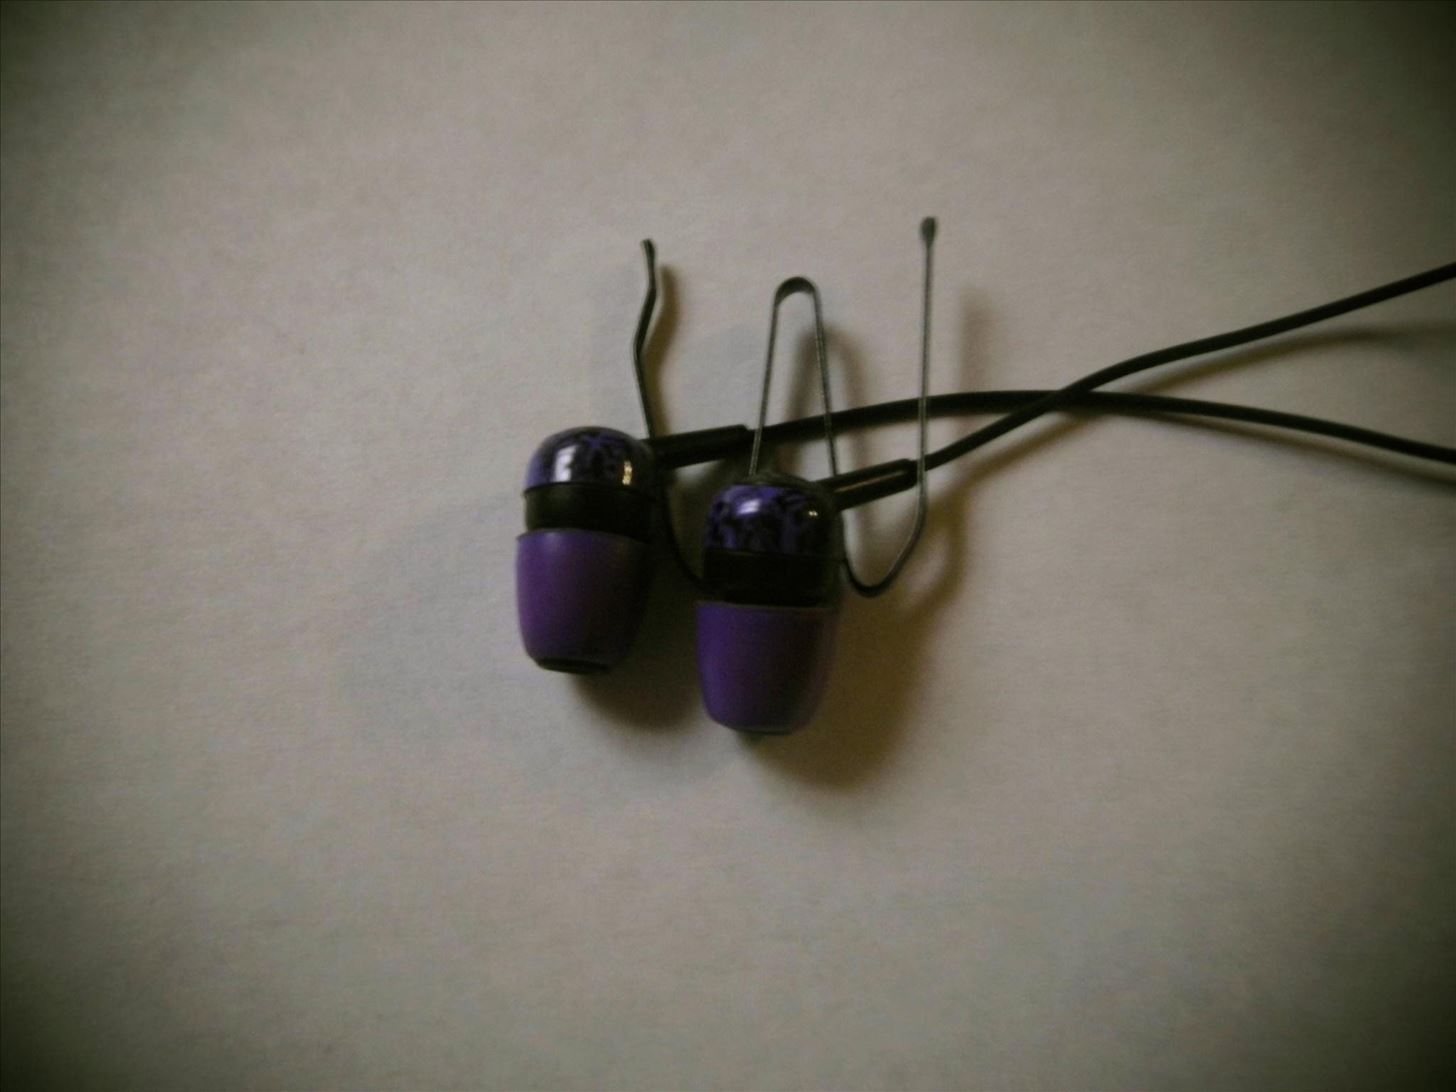 Eradicate Headphone Cord Clutter with a Spare Bobby Pin